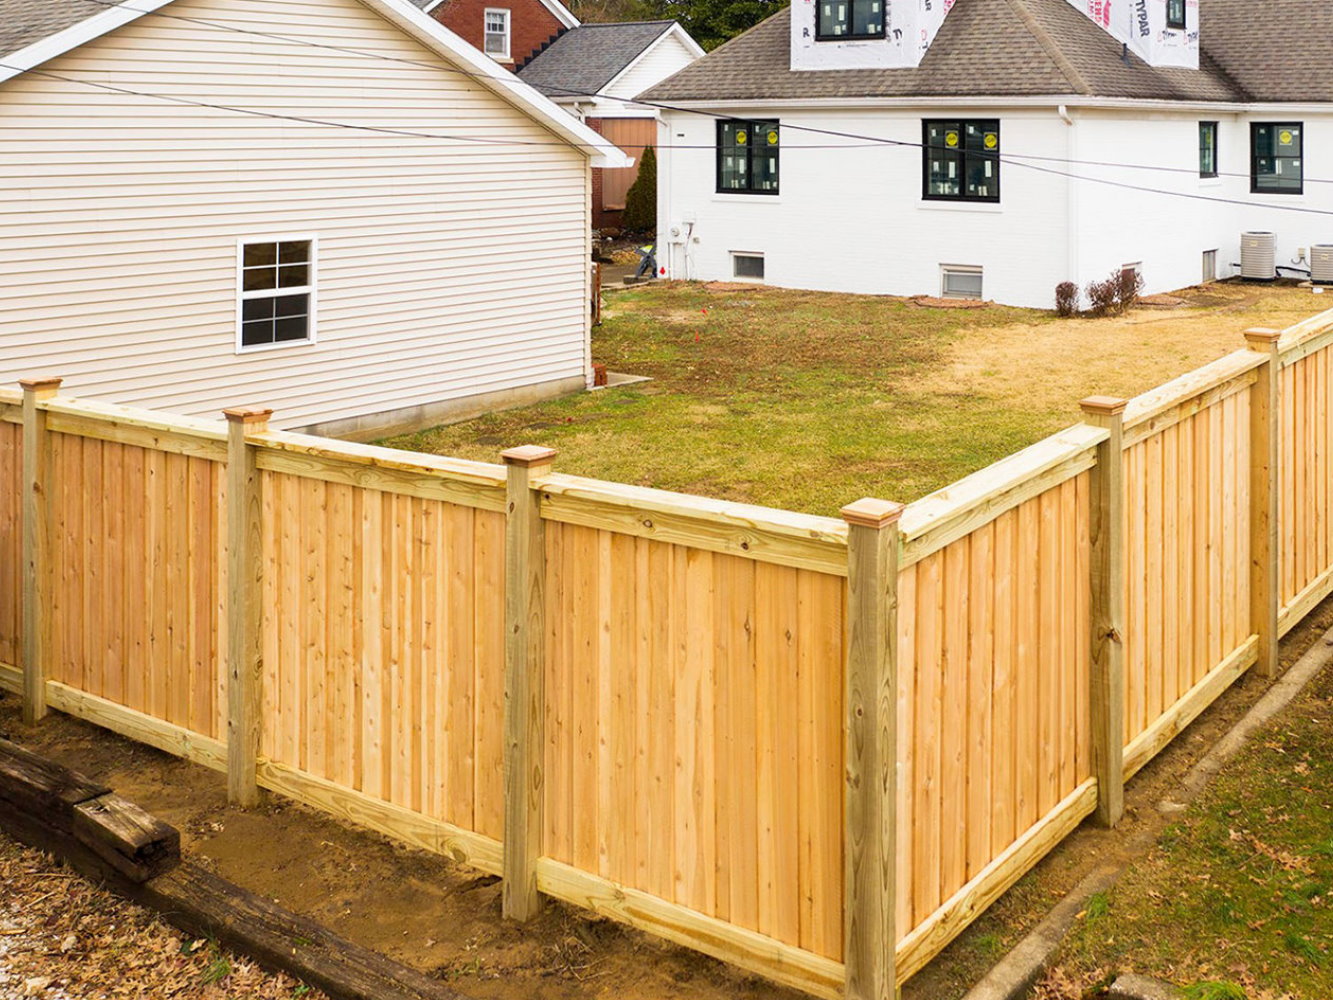 Henderson KY cap and trim style wood fence